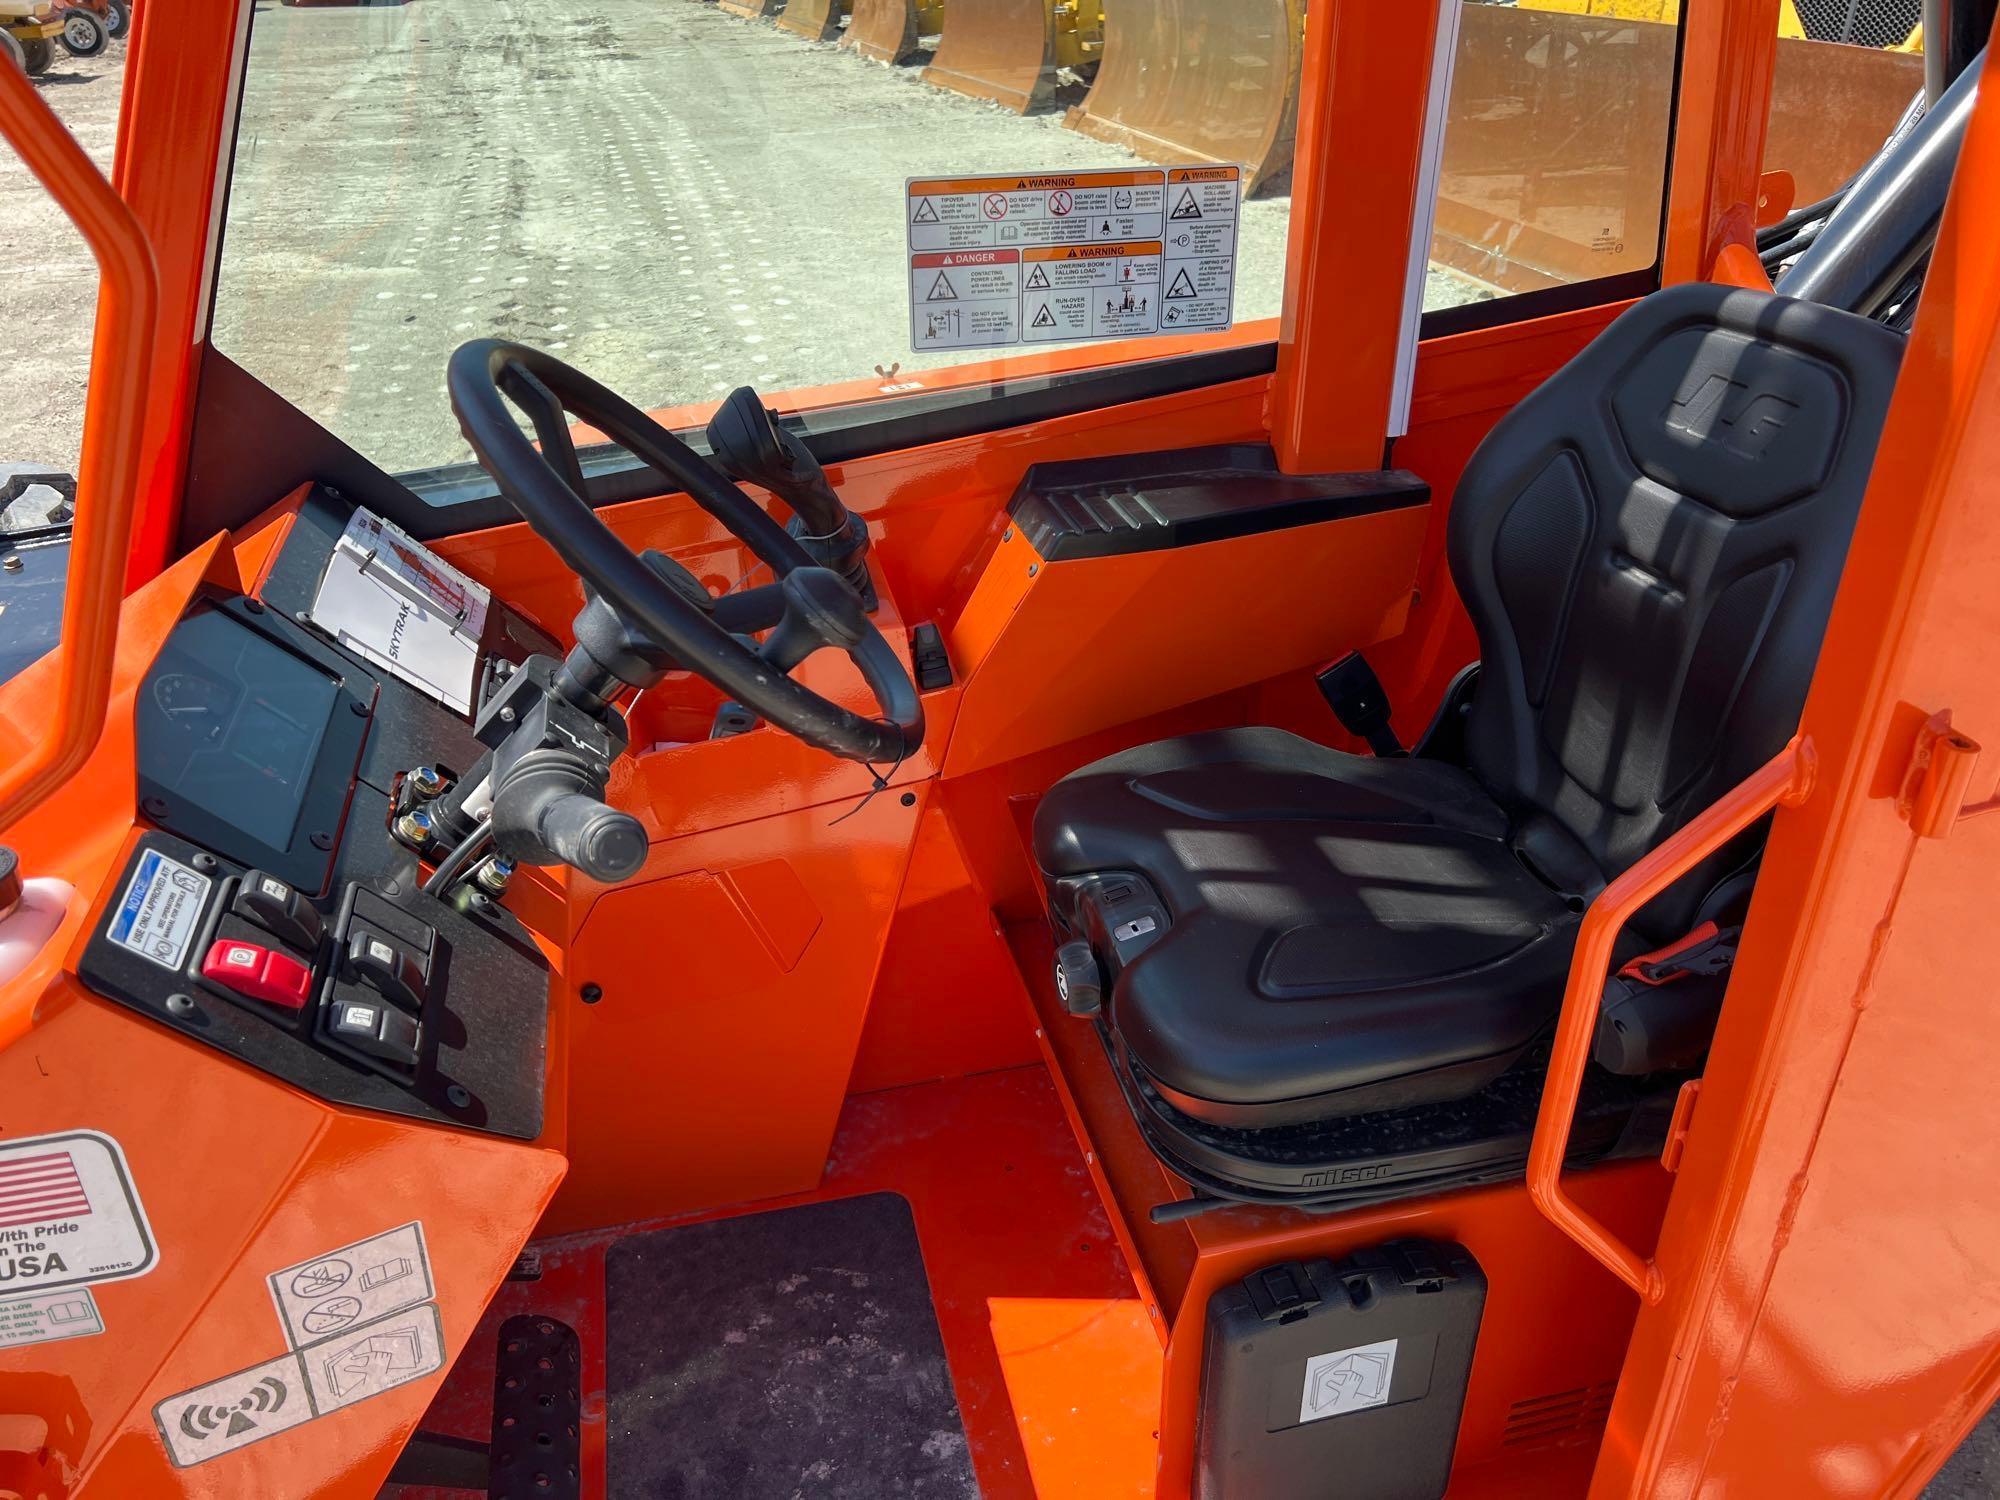 NEW UNUSED SKYTRAK 6034 TELESCOPIC FORKLIFT SN-129770 4x4, powered by diesel engine, equipped with